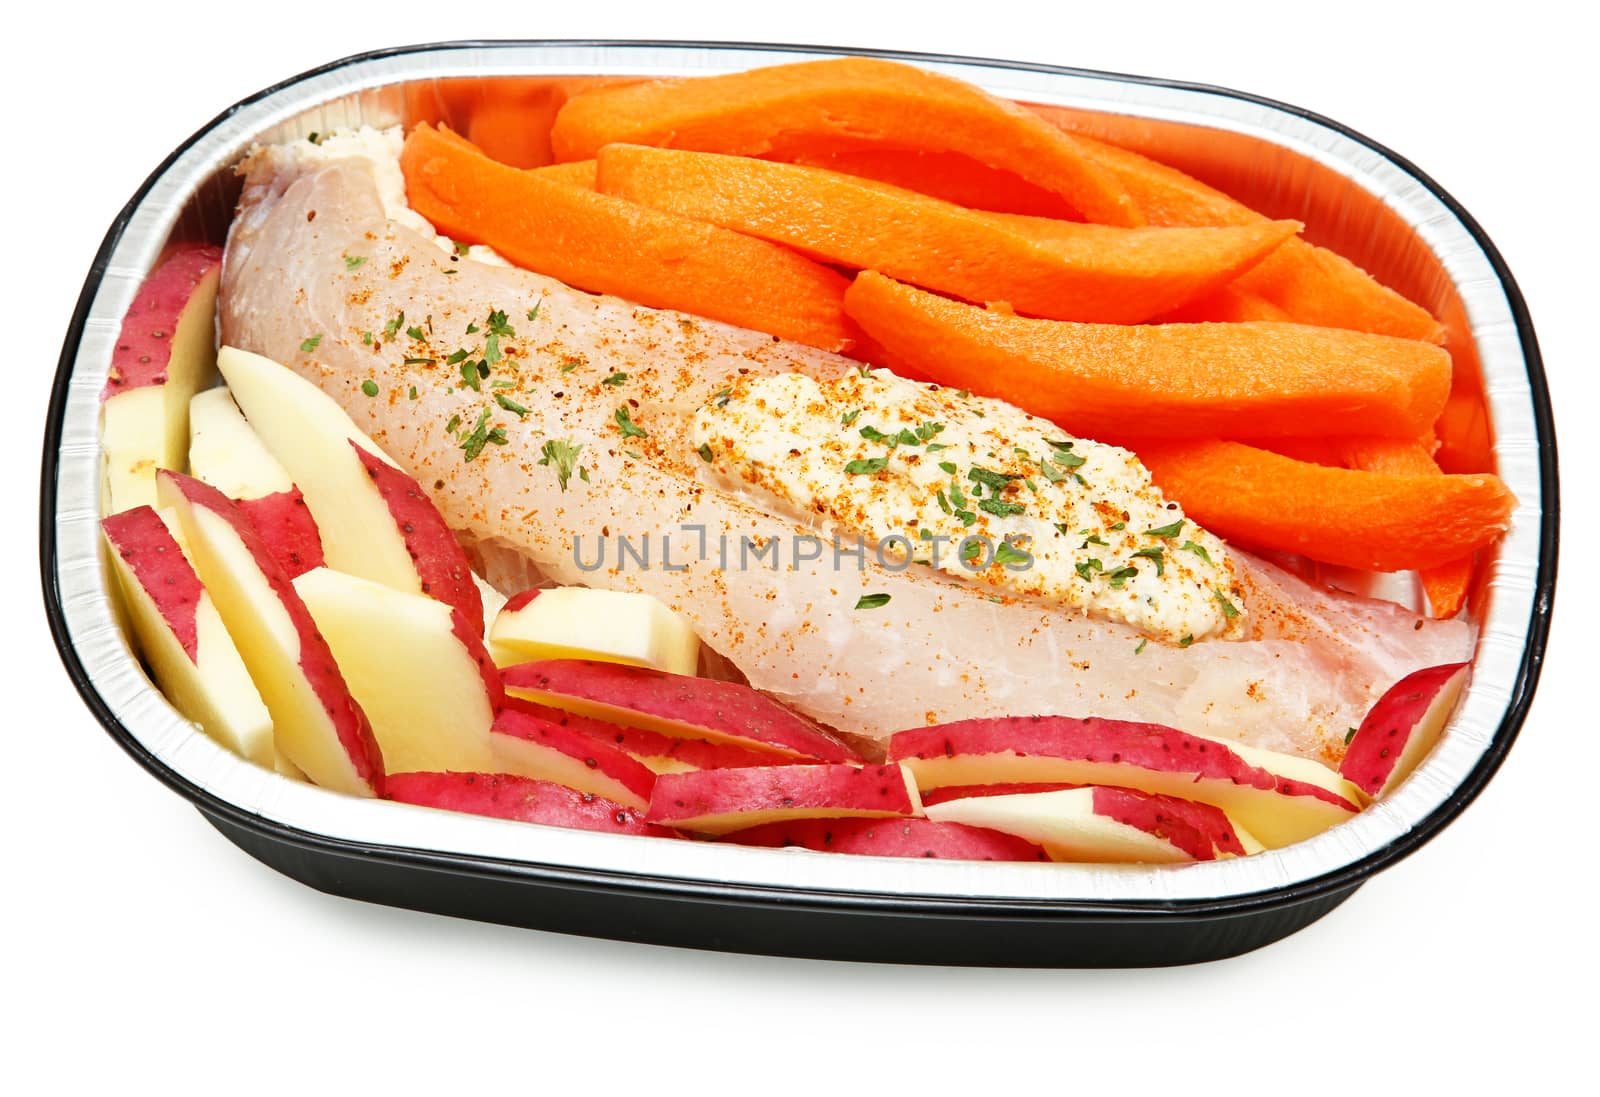 Raw Prepared Crab Stuffed Tilapia with carrots and potatoes Ready for the Oven. Isolated on white.